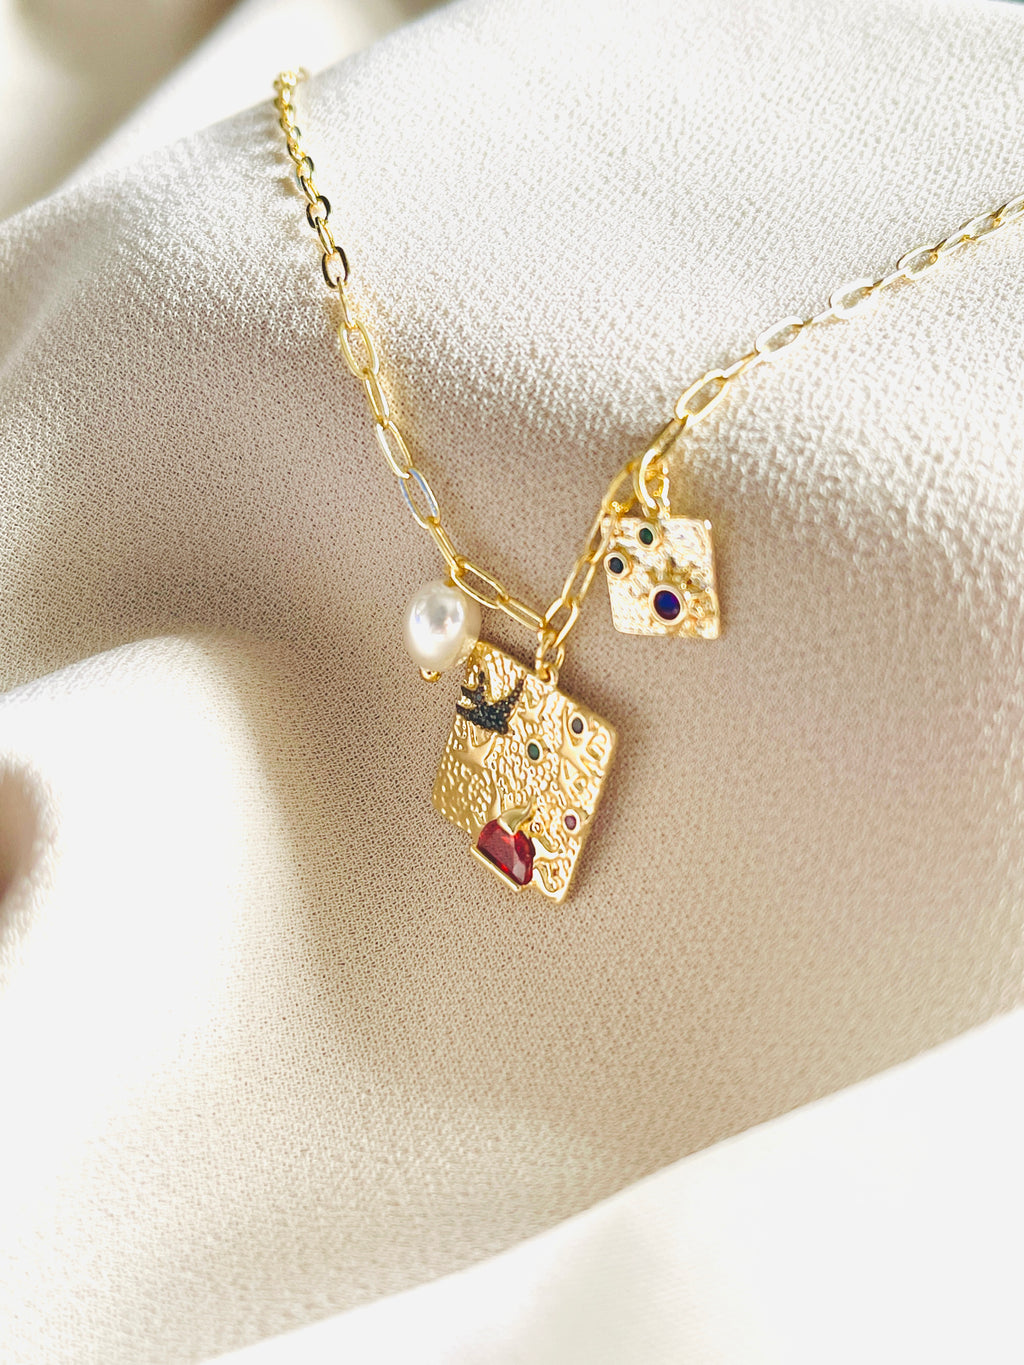 ROSE - Square Pendant With Charm Dangle Necklace In 14k Gold – JohnnyB  Jewelry